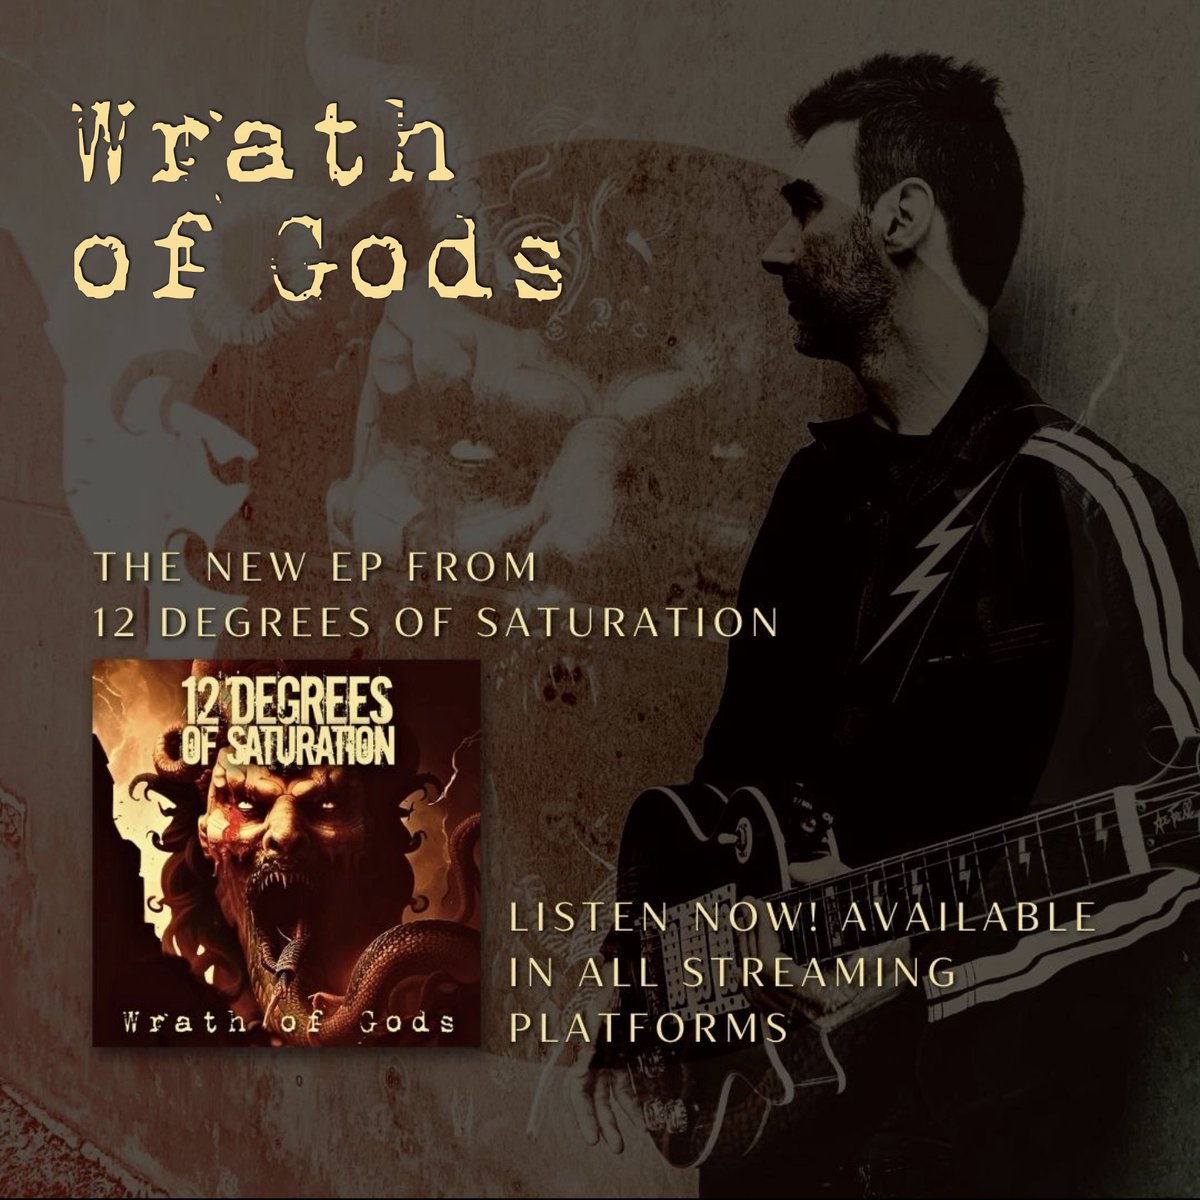 “Wrath of Gods”
The latest EP from 12 Degrees of Saturation.
Listen now in your favorite streaming platform.
#metal #heavymetal #hardrock #rock #instrumentalmetal #instrumentalheavymetal #instrumentalhardrock #instrumentalrock #metalinstrumental